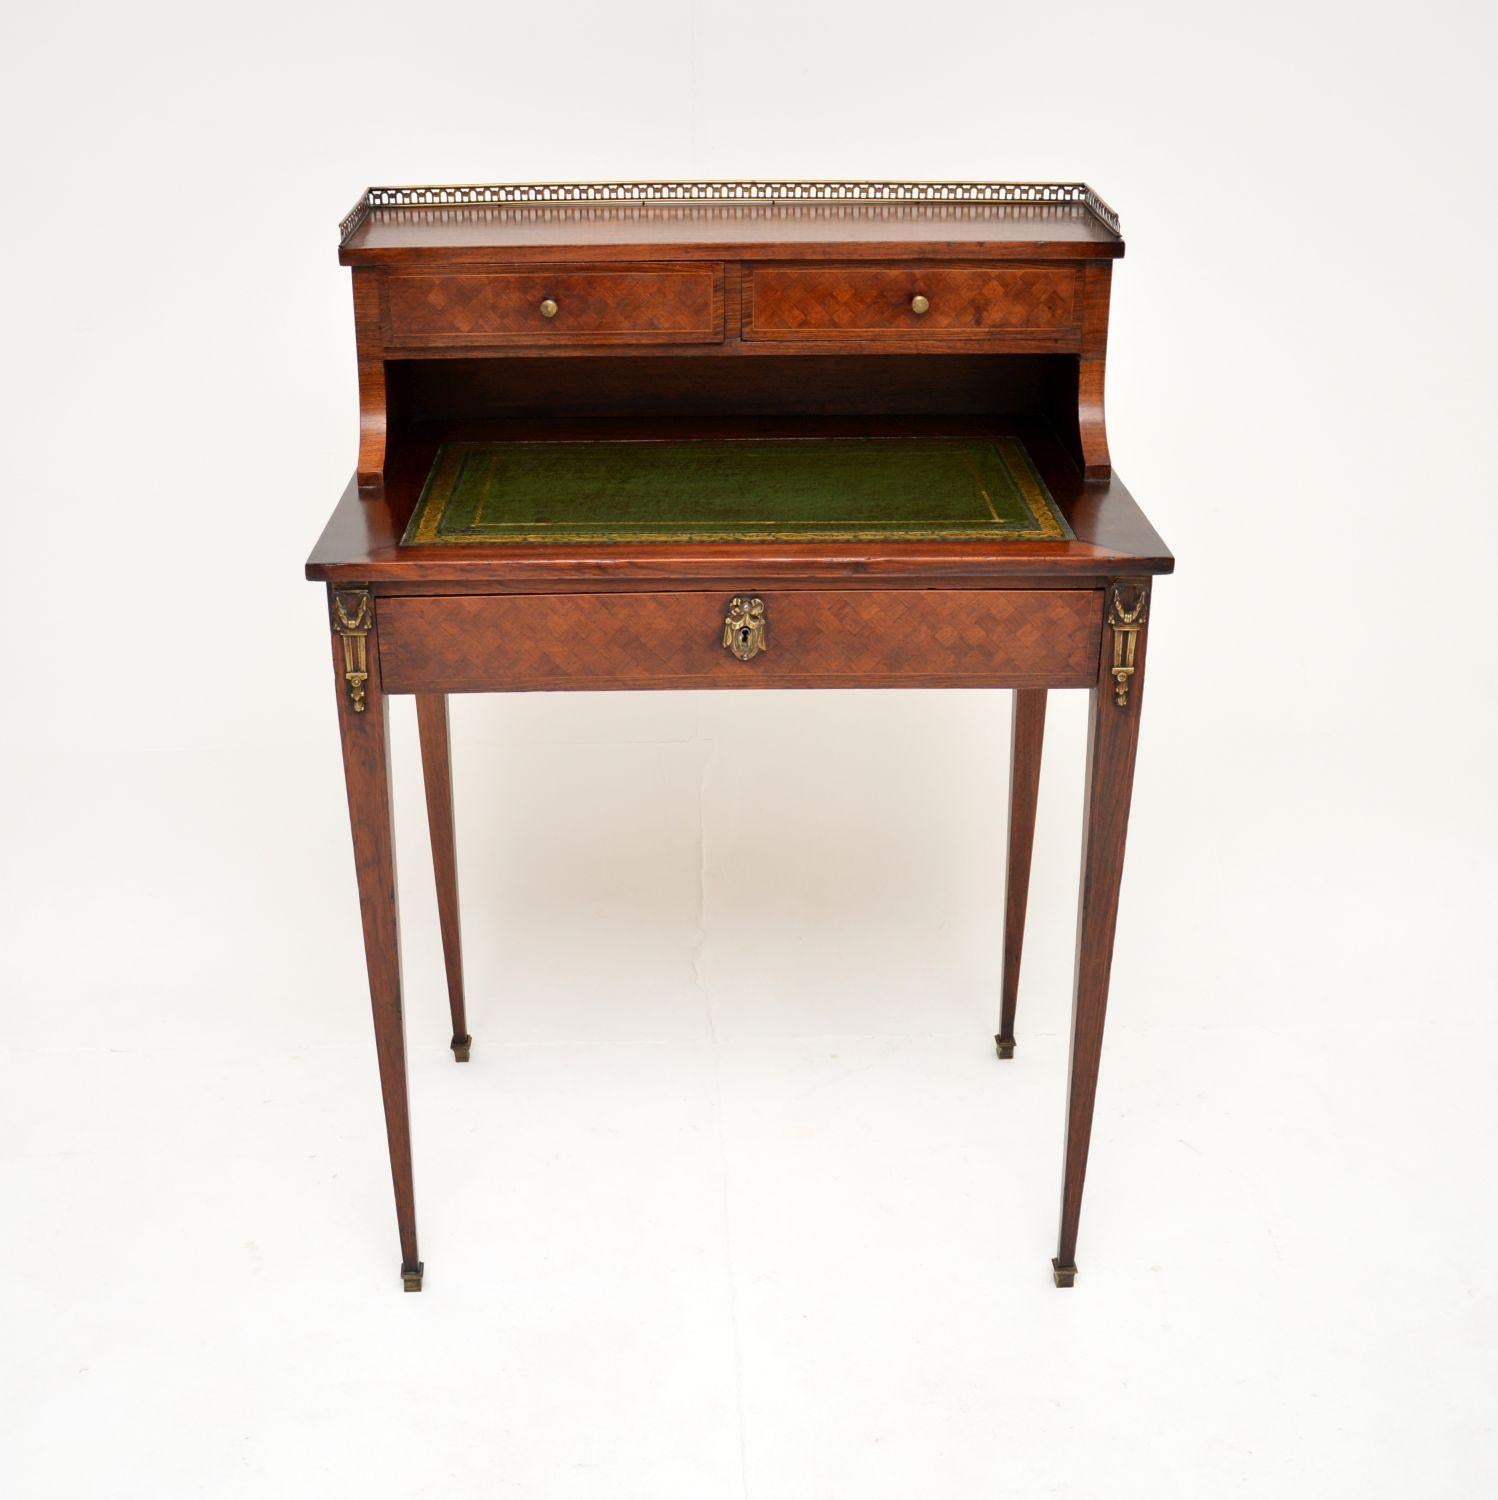 A gorgeous antique French escritoire writing desk, dating from around the 1880-1900 period.

It is of extremely fine quality, with stunning grain patterns and veneers on the drawer fronts. There are beautifully cast gilt bronze mounts, and an inset